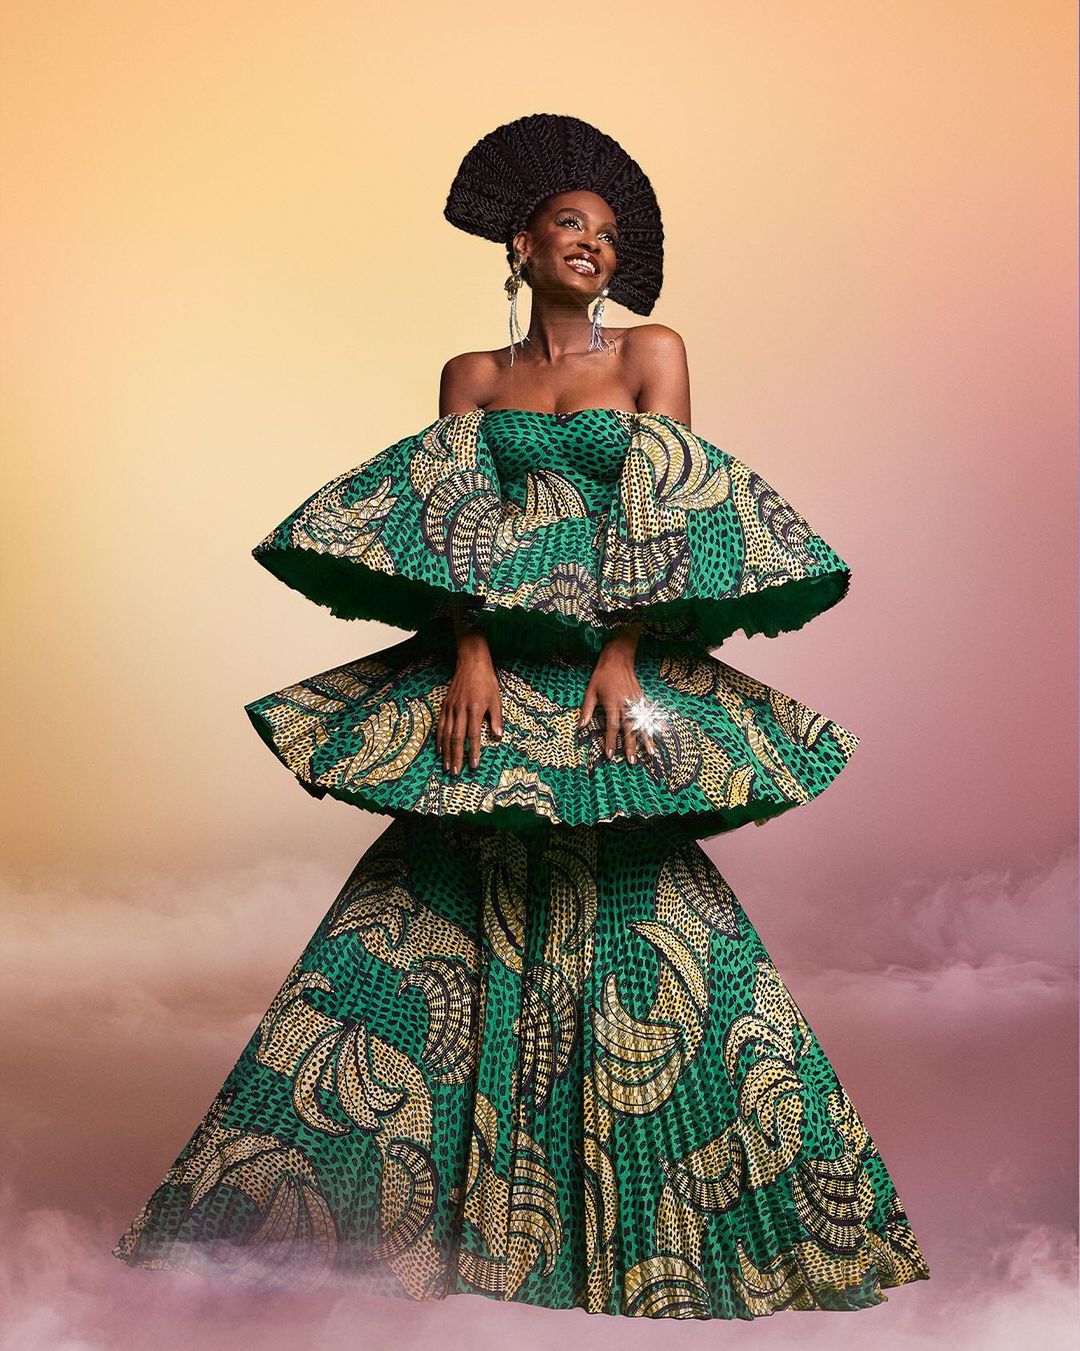 30+ Best Ankara's Fashion, Styles & Latest Trends For 2021 - Dream Africa